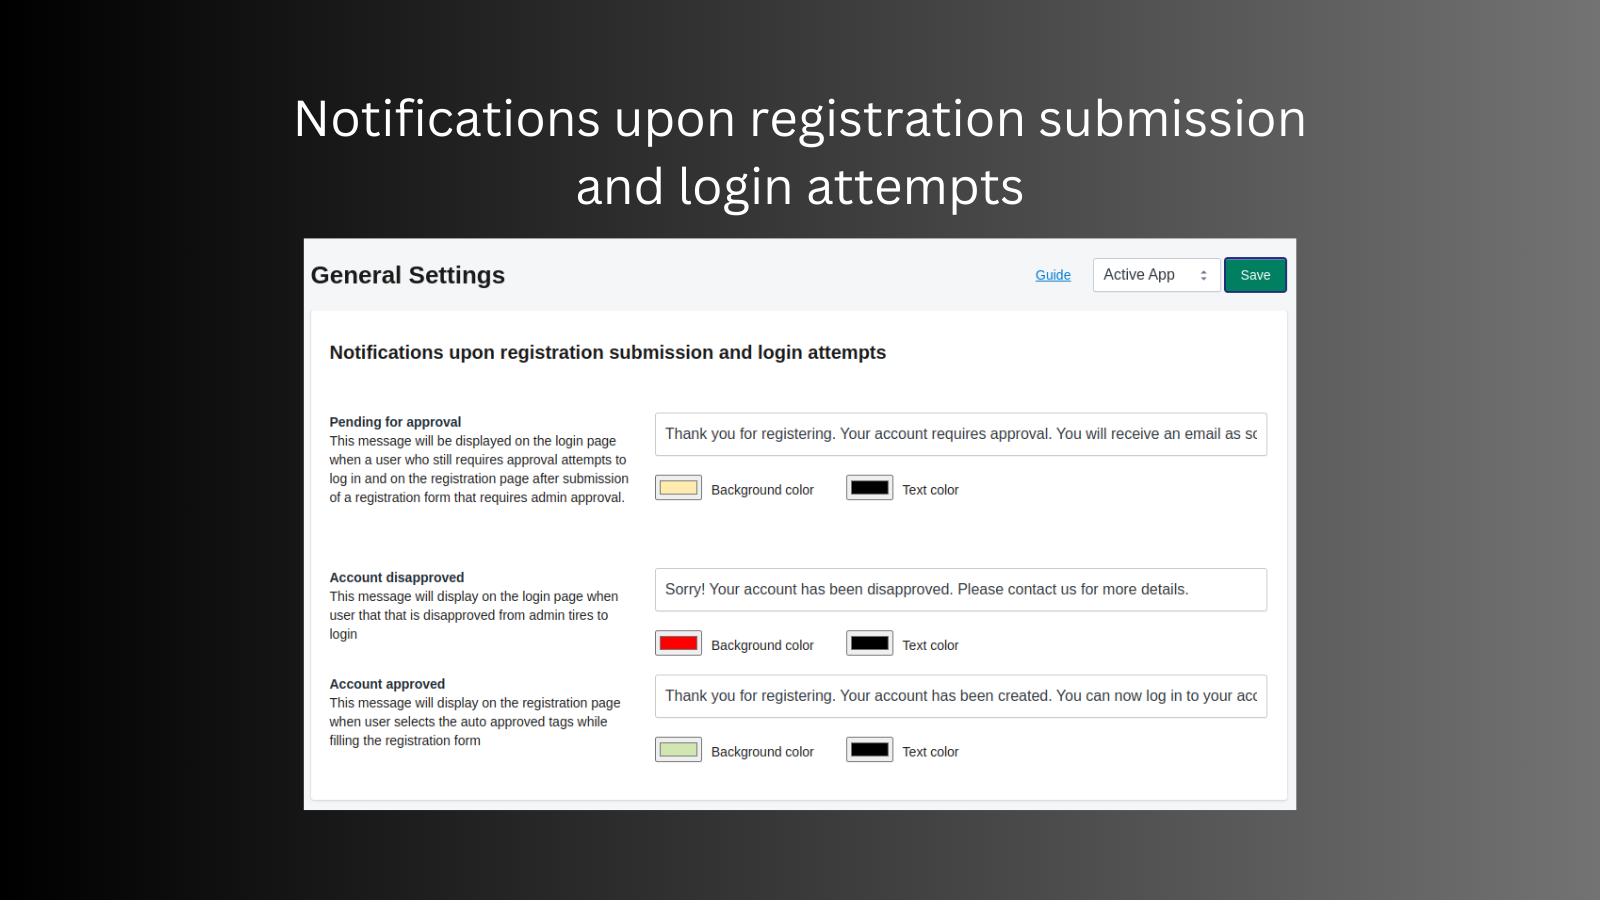 Notifications upon registration submission and login attempts